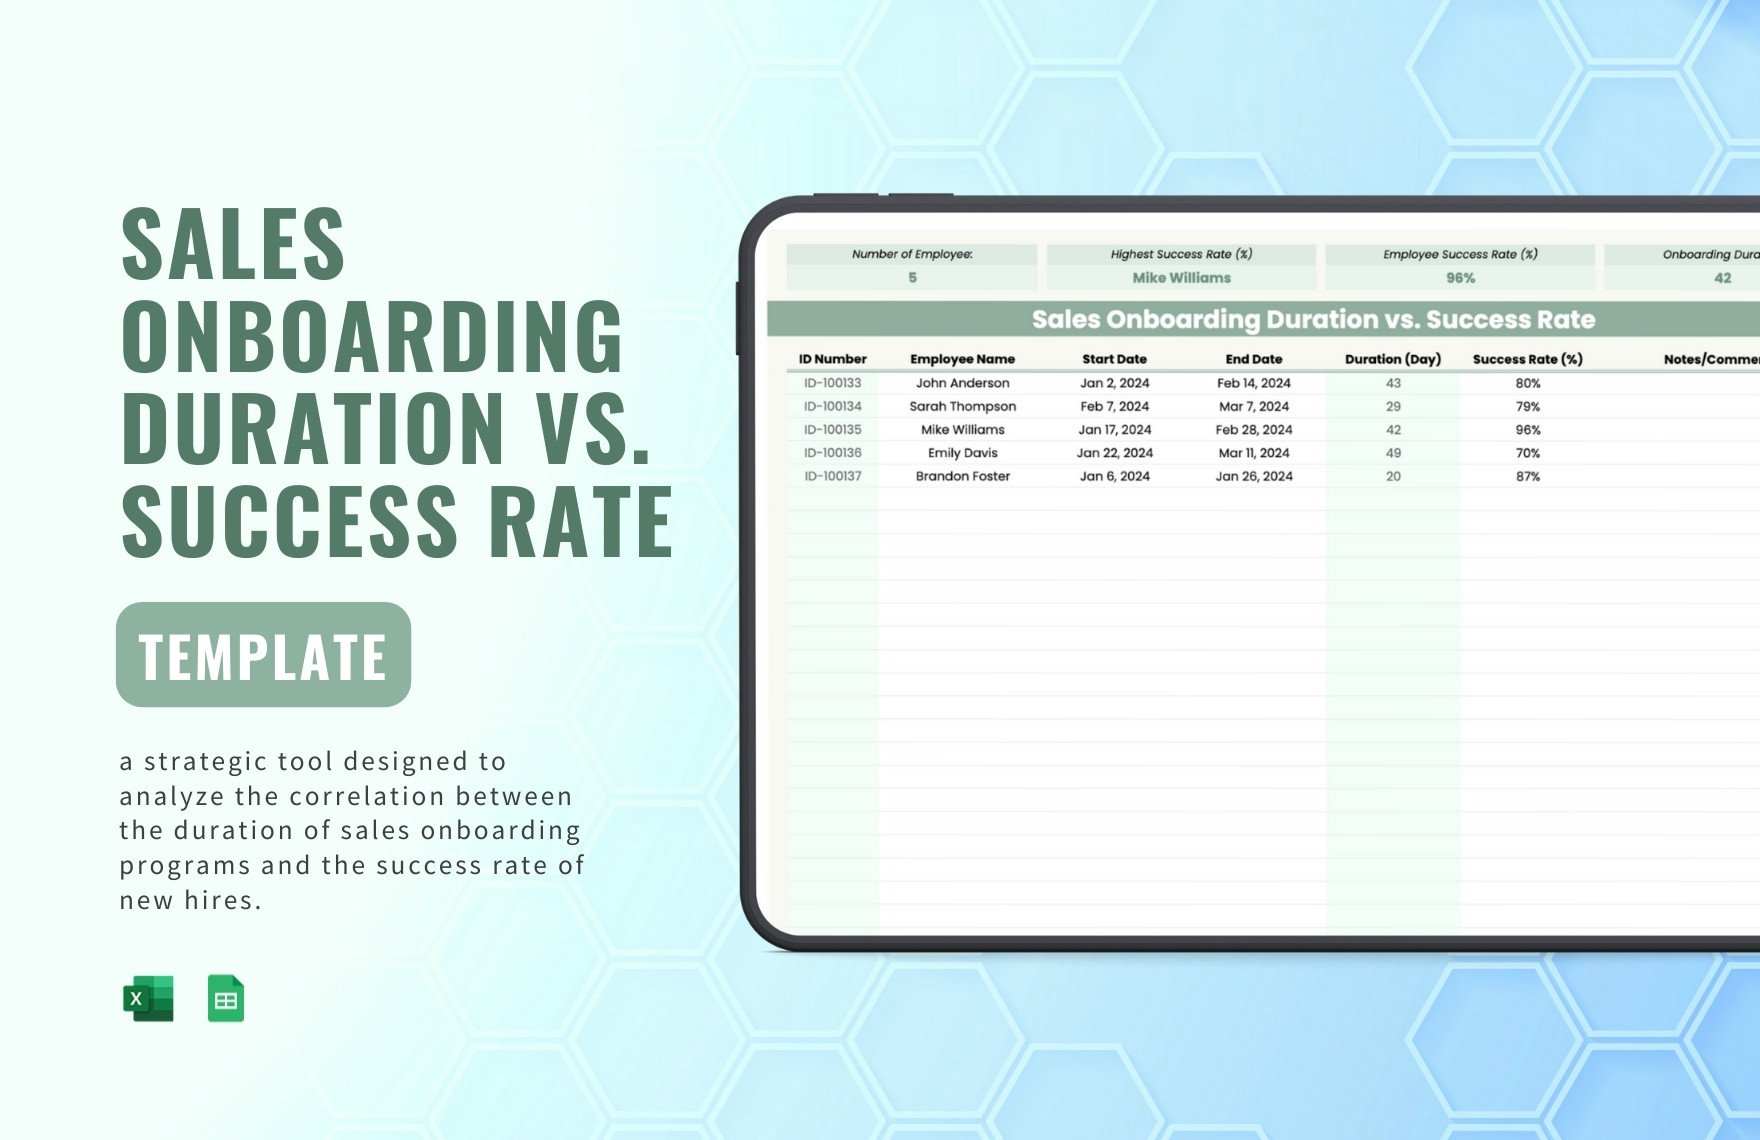 Sales Onboarding Duration vs. Success Rate Template